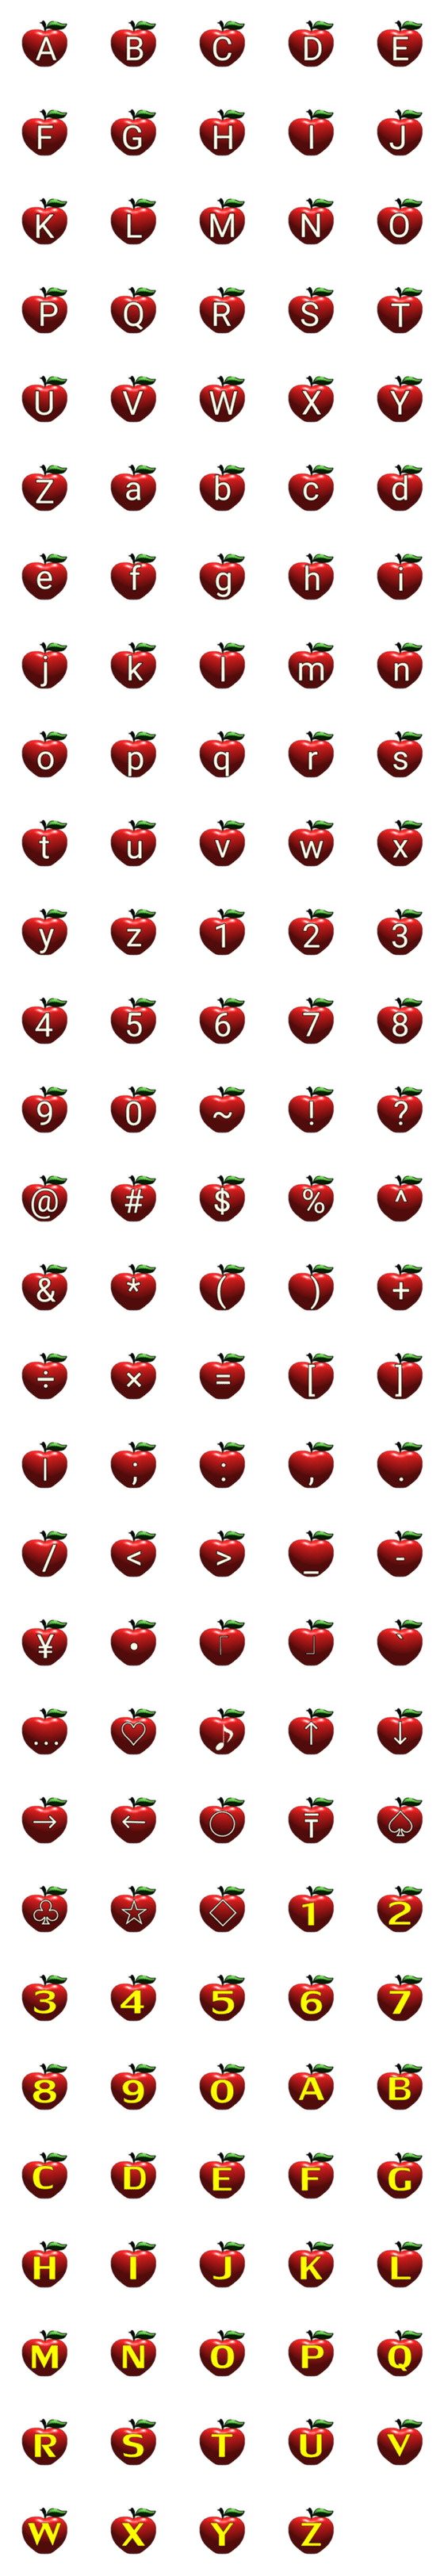 [LINE絵文字](ABC) RED APPlE emoji oo4の画像一覧